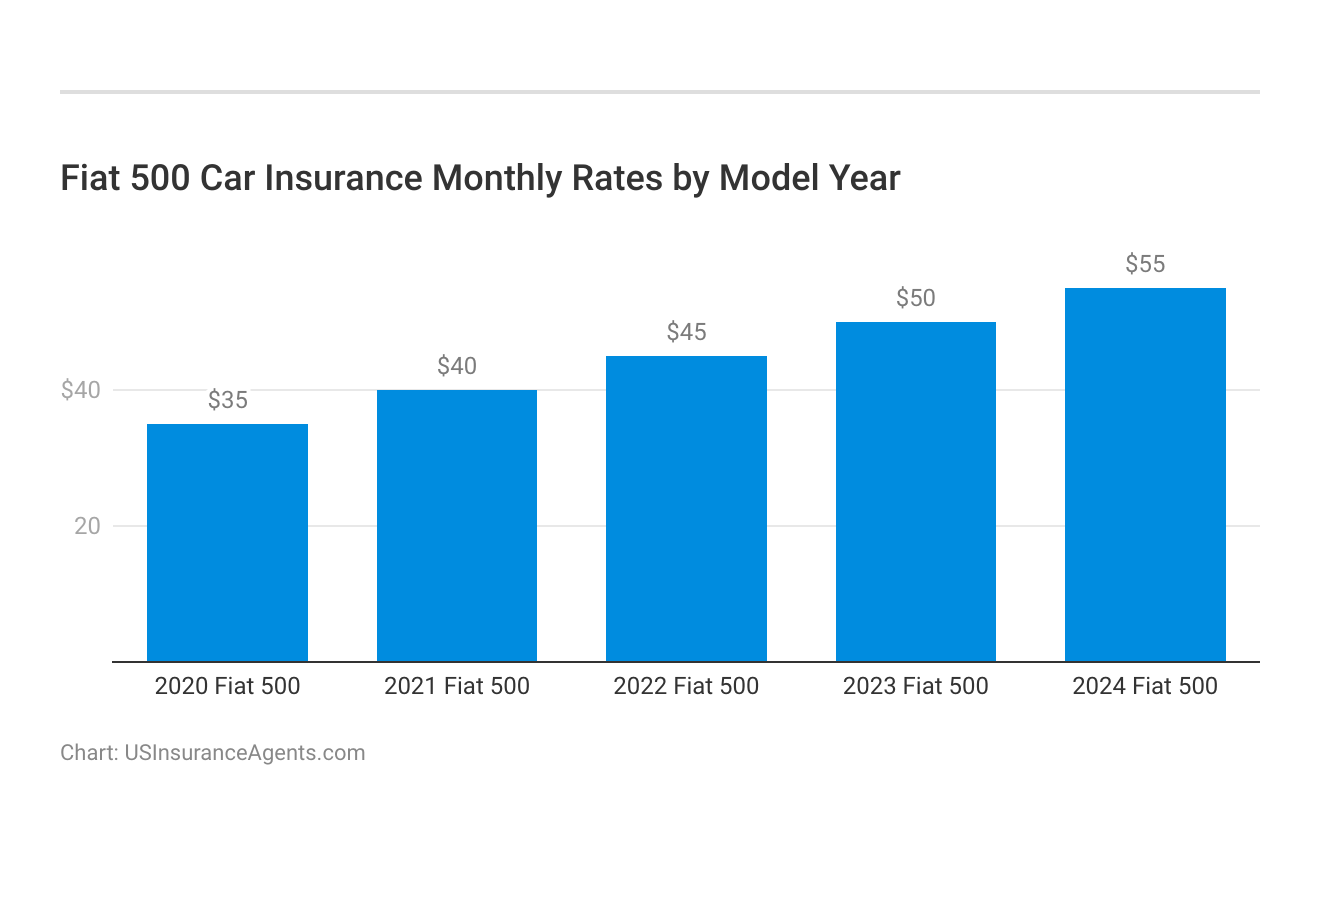 <h3>Fiat 500 Car Insurance Monthly Rates by Model Year</h3>